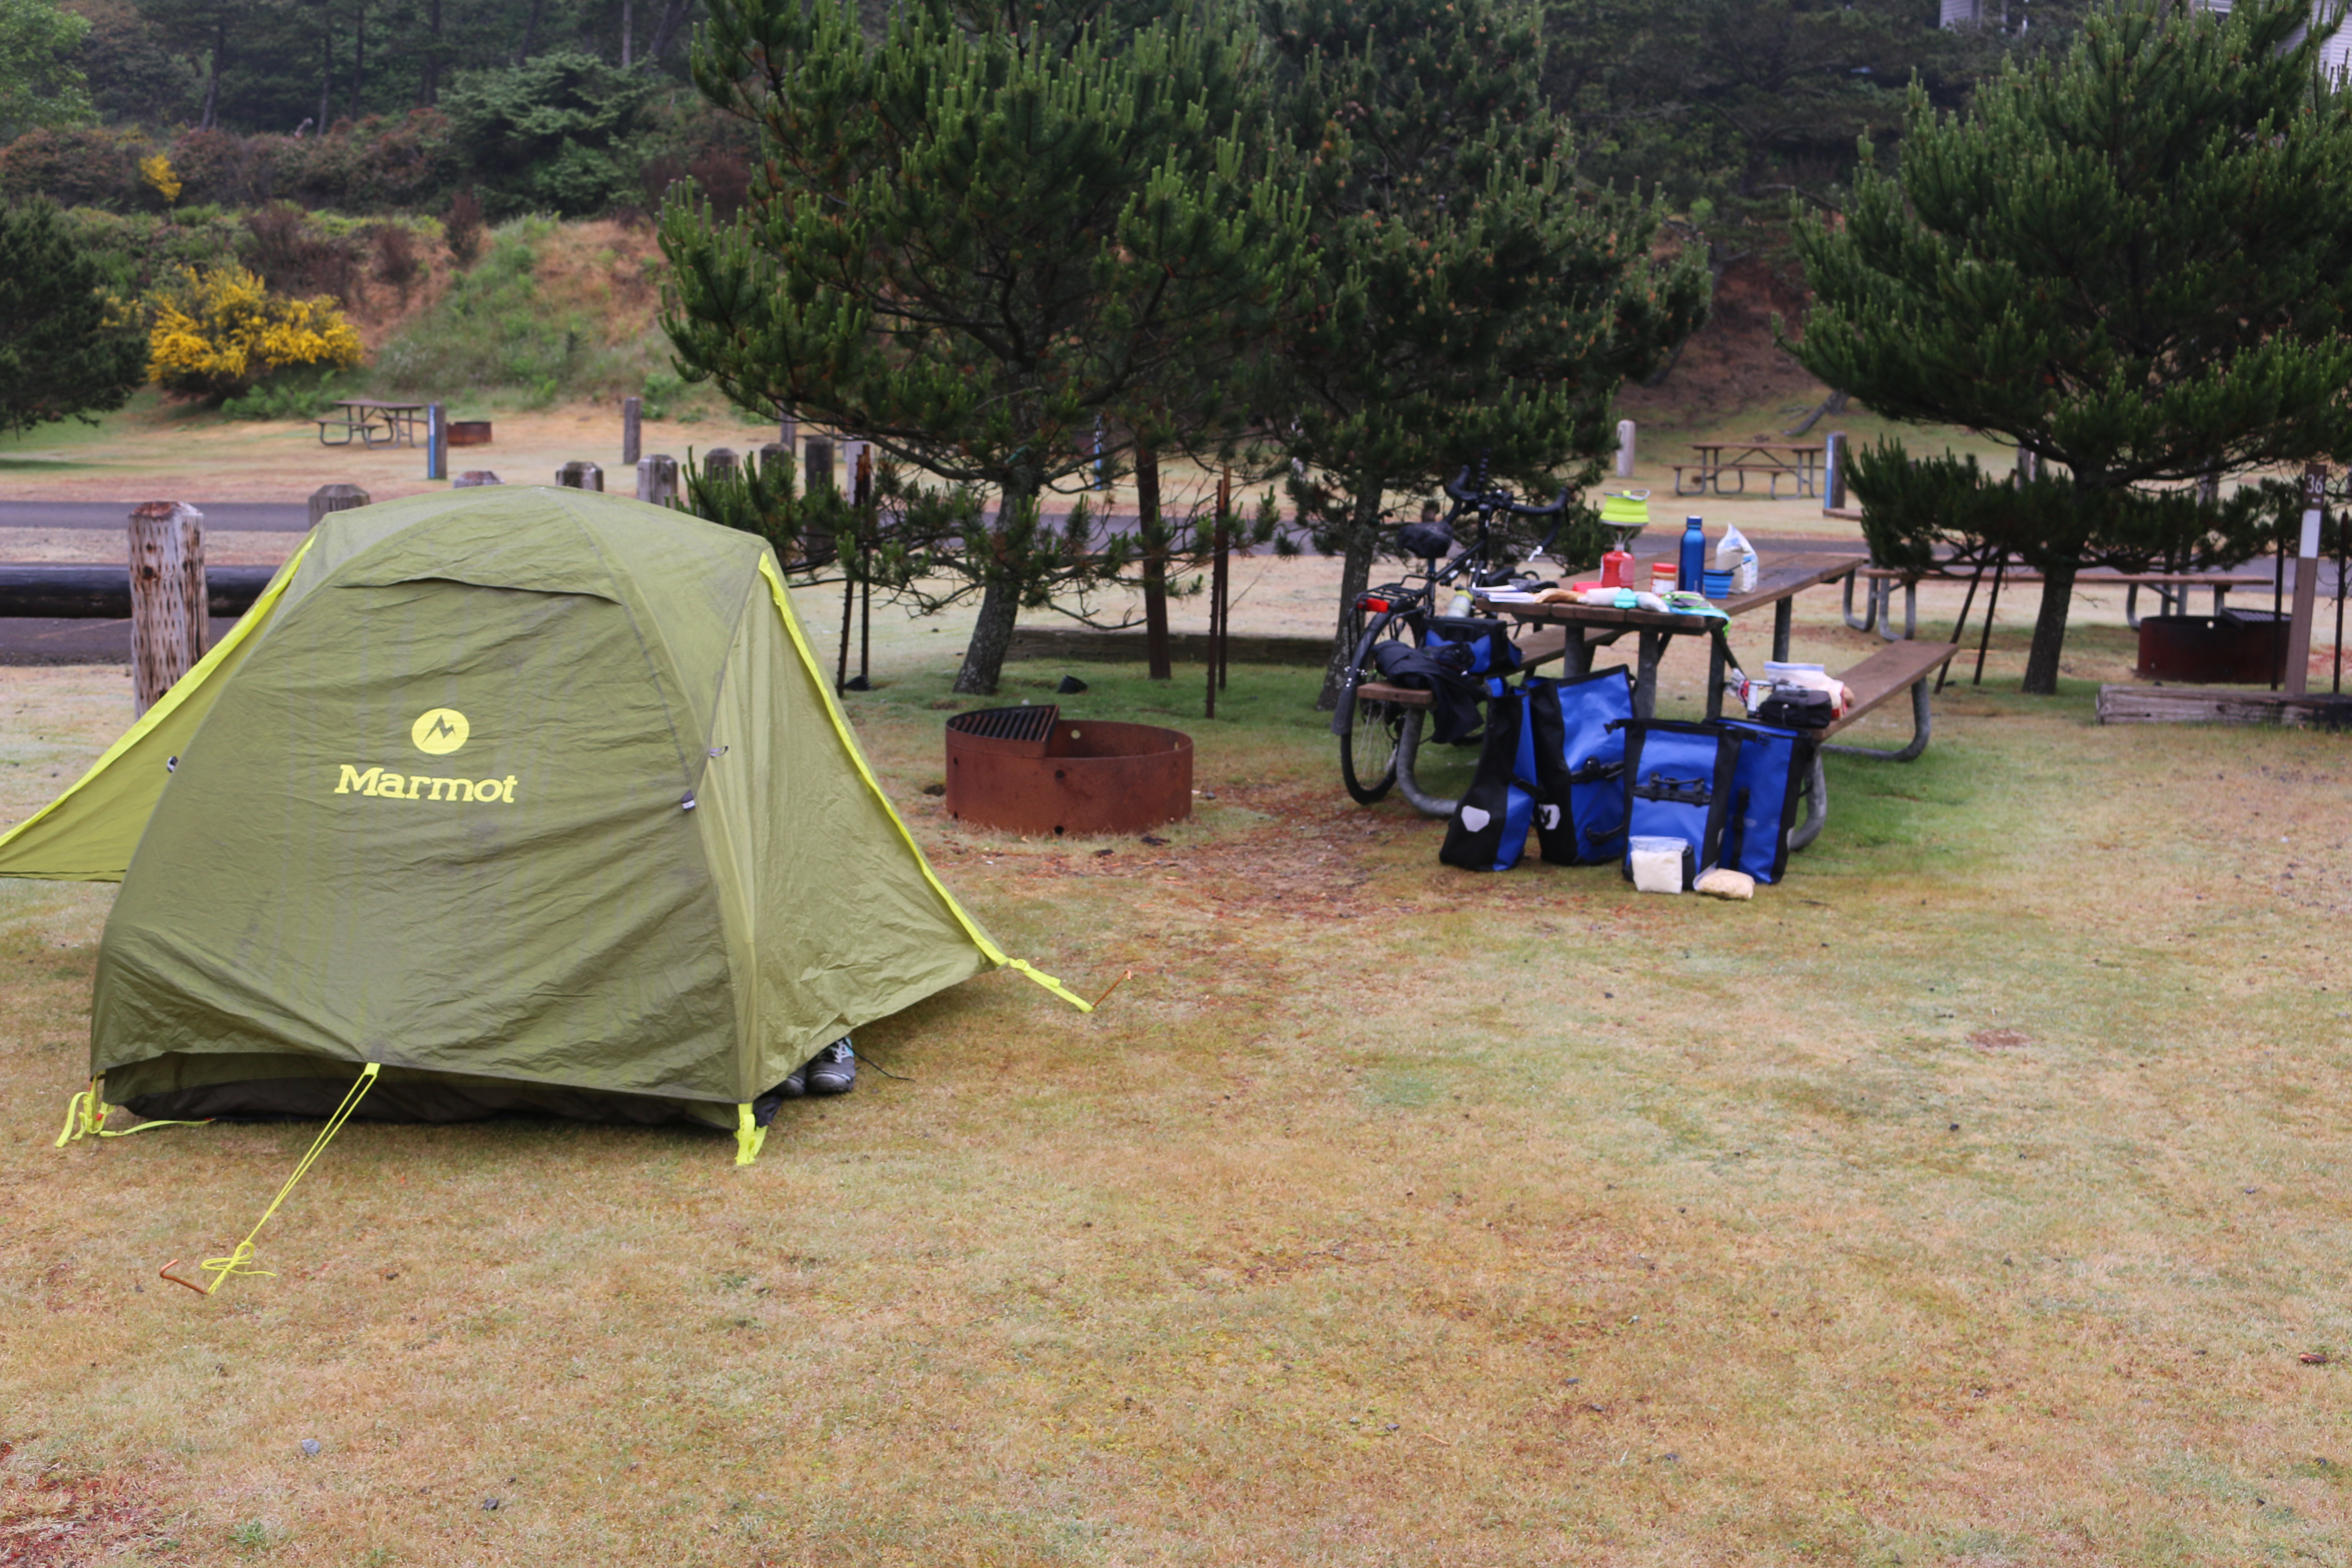 Tent on the left, unused firepit in the middle, on the right, a bike leaning on a picnic table that is strewn with gear.